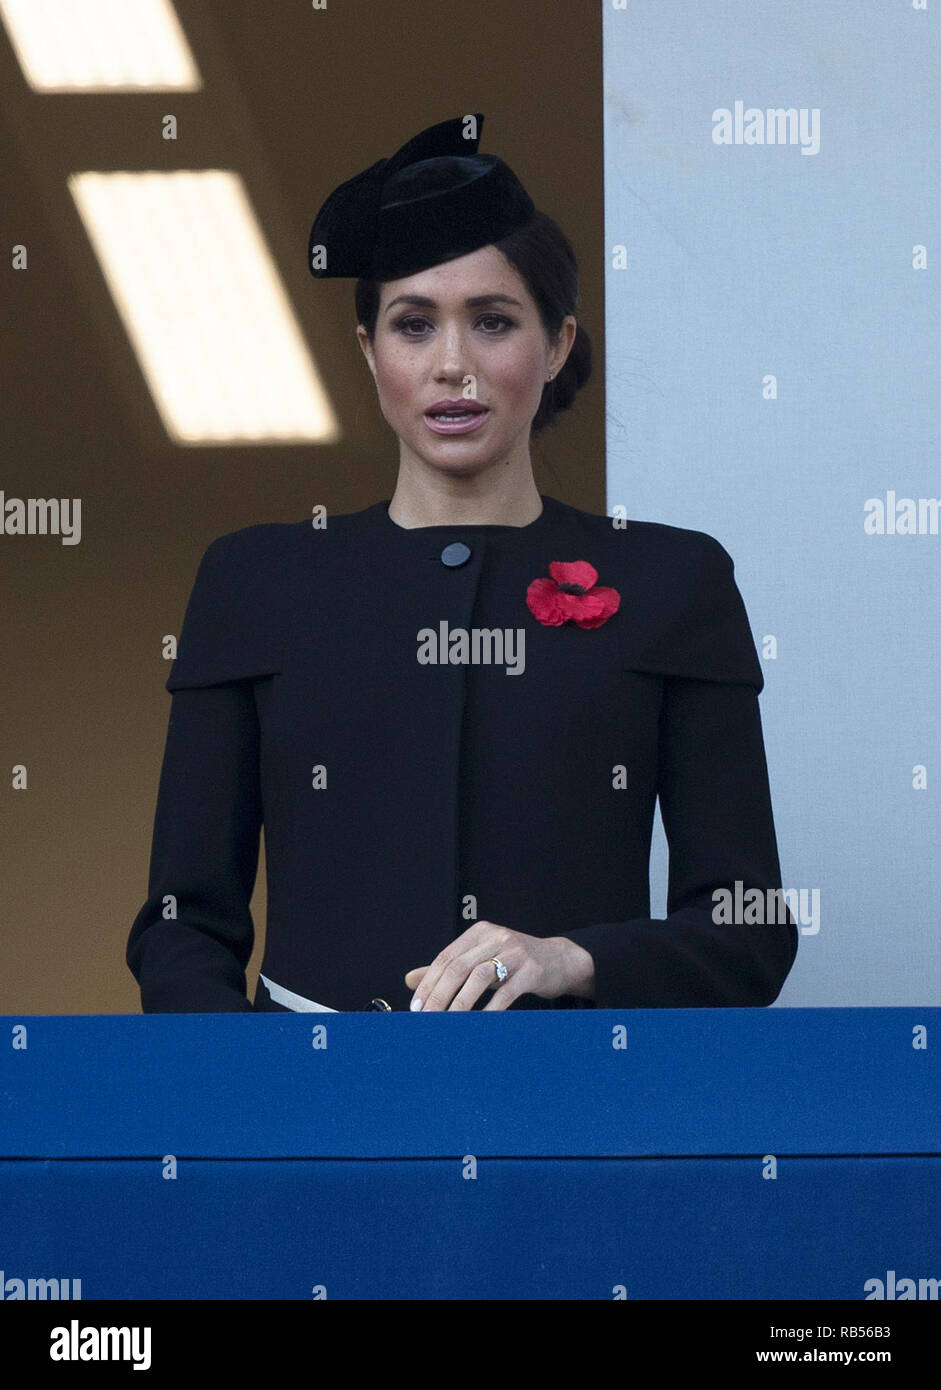 Meghan, Duchess of Sussex pictured at the Cenotaph in London on November 11th 2018, to mark the centenary of the Armistice which ended World War I. Stock Photo